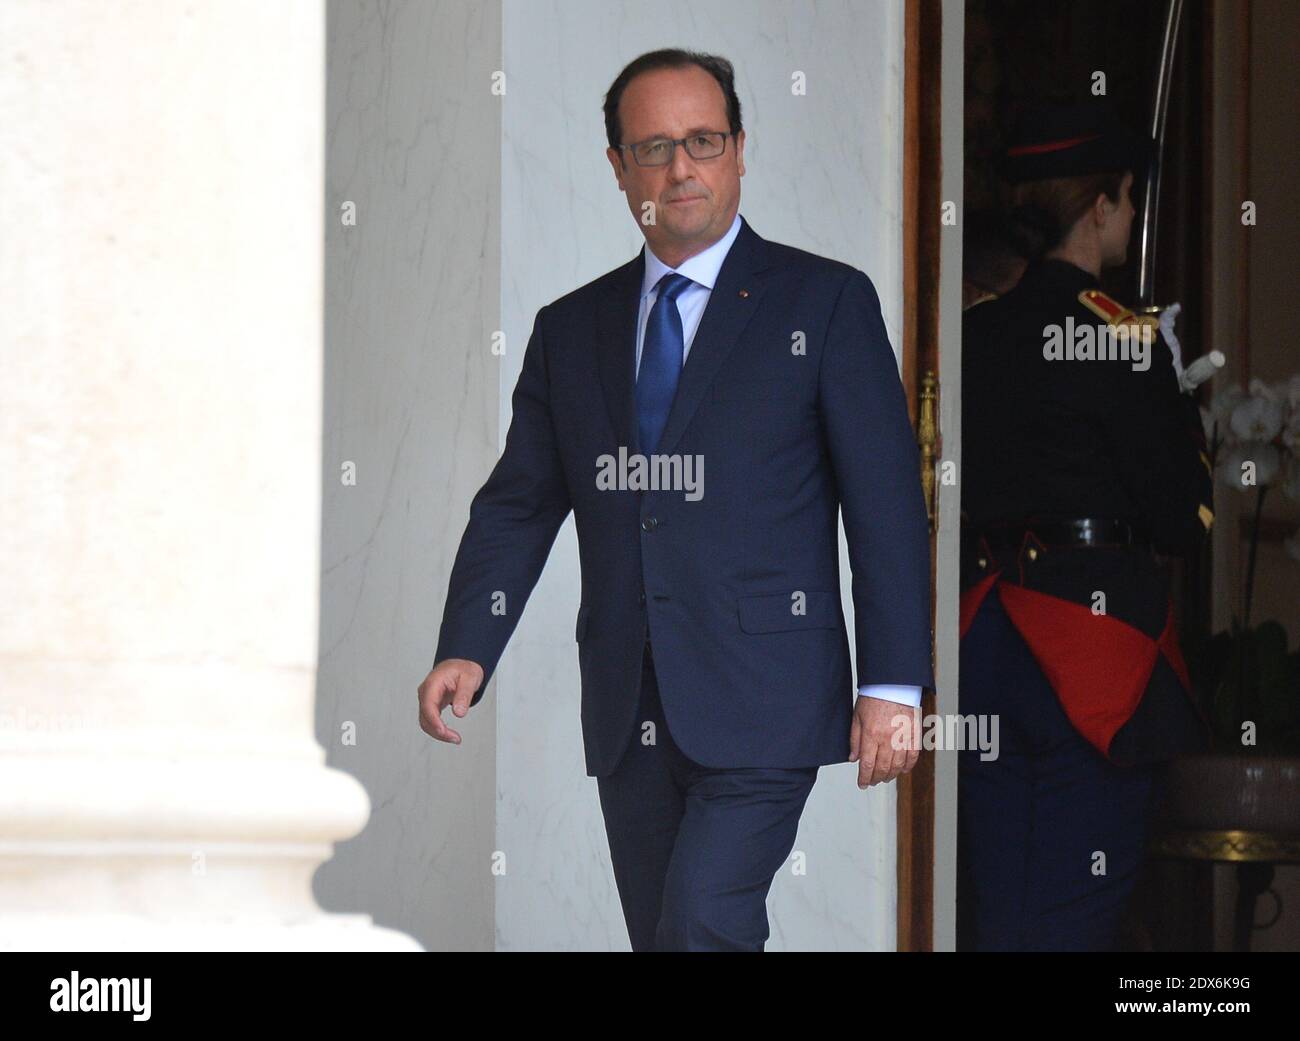 President Francois Hollande leaving the Elysee presidential palace in Paris, France after a weekly cabinet meeting. French President Francois Hollande on August 27 installed a former banker and ally as economy minister in an emergency reshuffle seen as the 'last chance' to haul France out of the biggest crisis of his presidency. Hollande caught everyone off guard with the appointment of Emmanuel Macron, a 36-year-old ex-Rothschild banker and architect of the president's economic policy. Photo by Christian Liewig/ABACAPRESS.COM Stock Photo